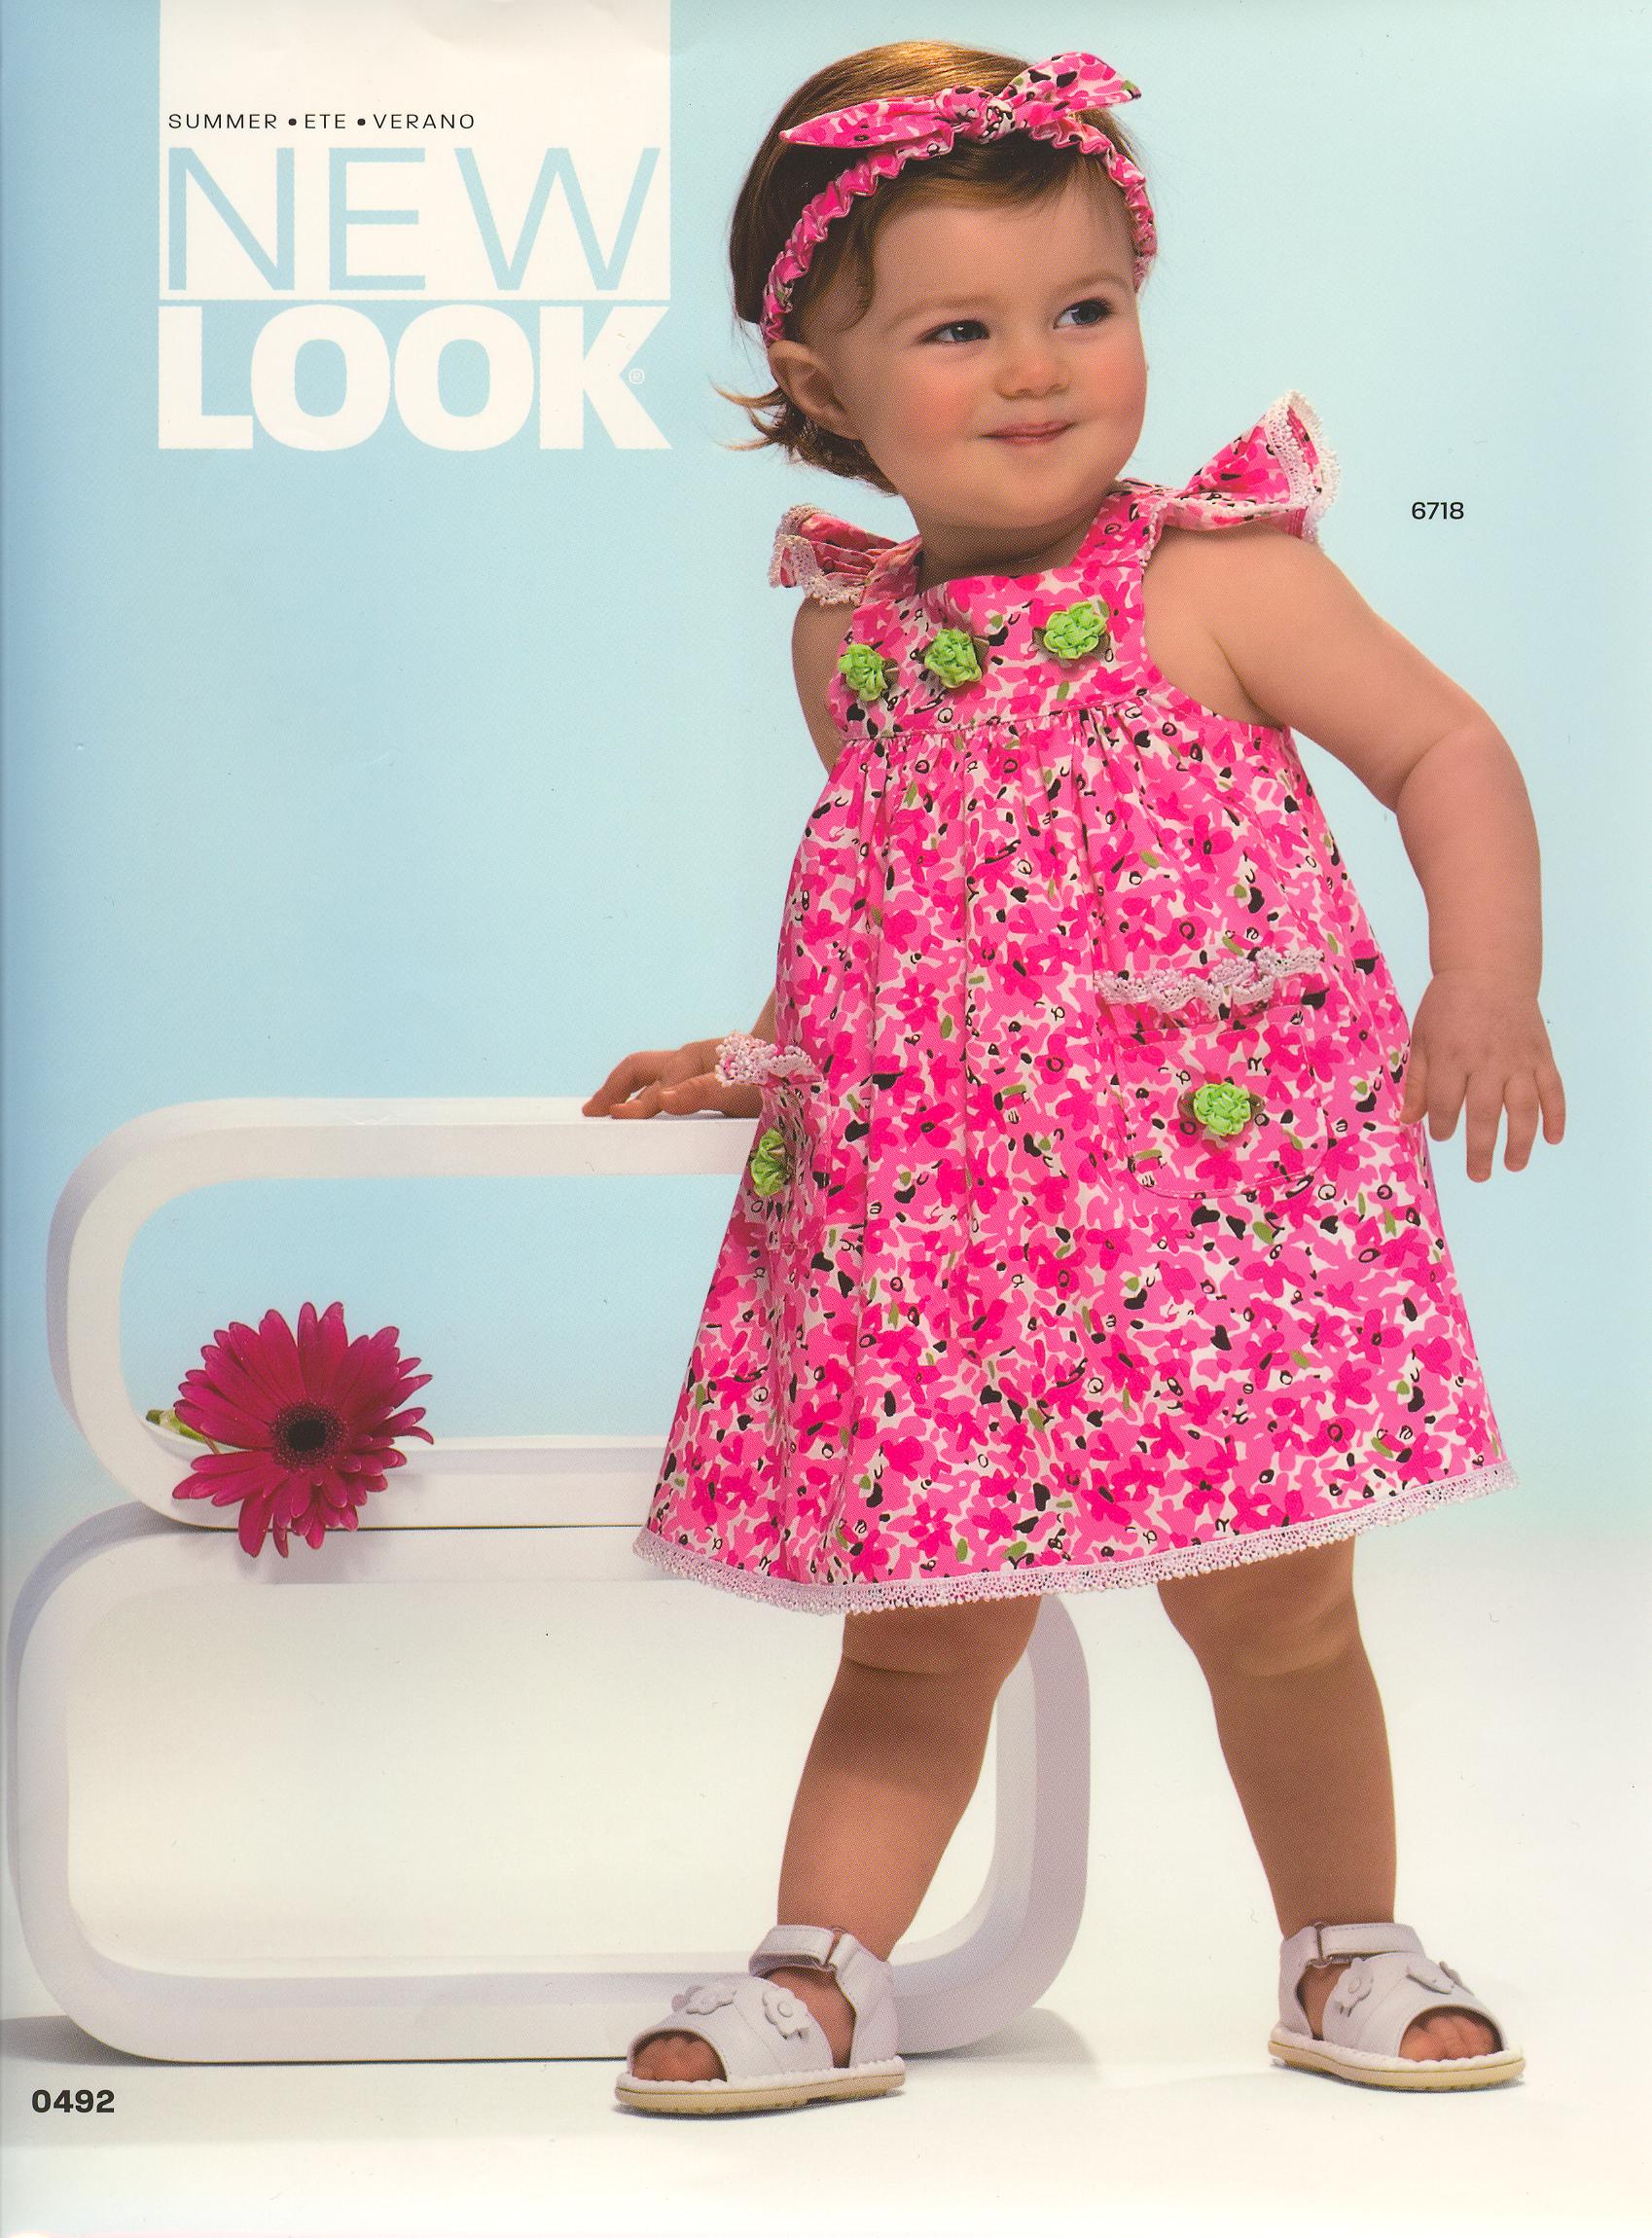 On the cover of New Look Catalog